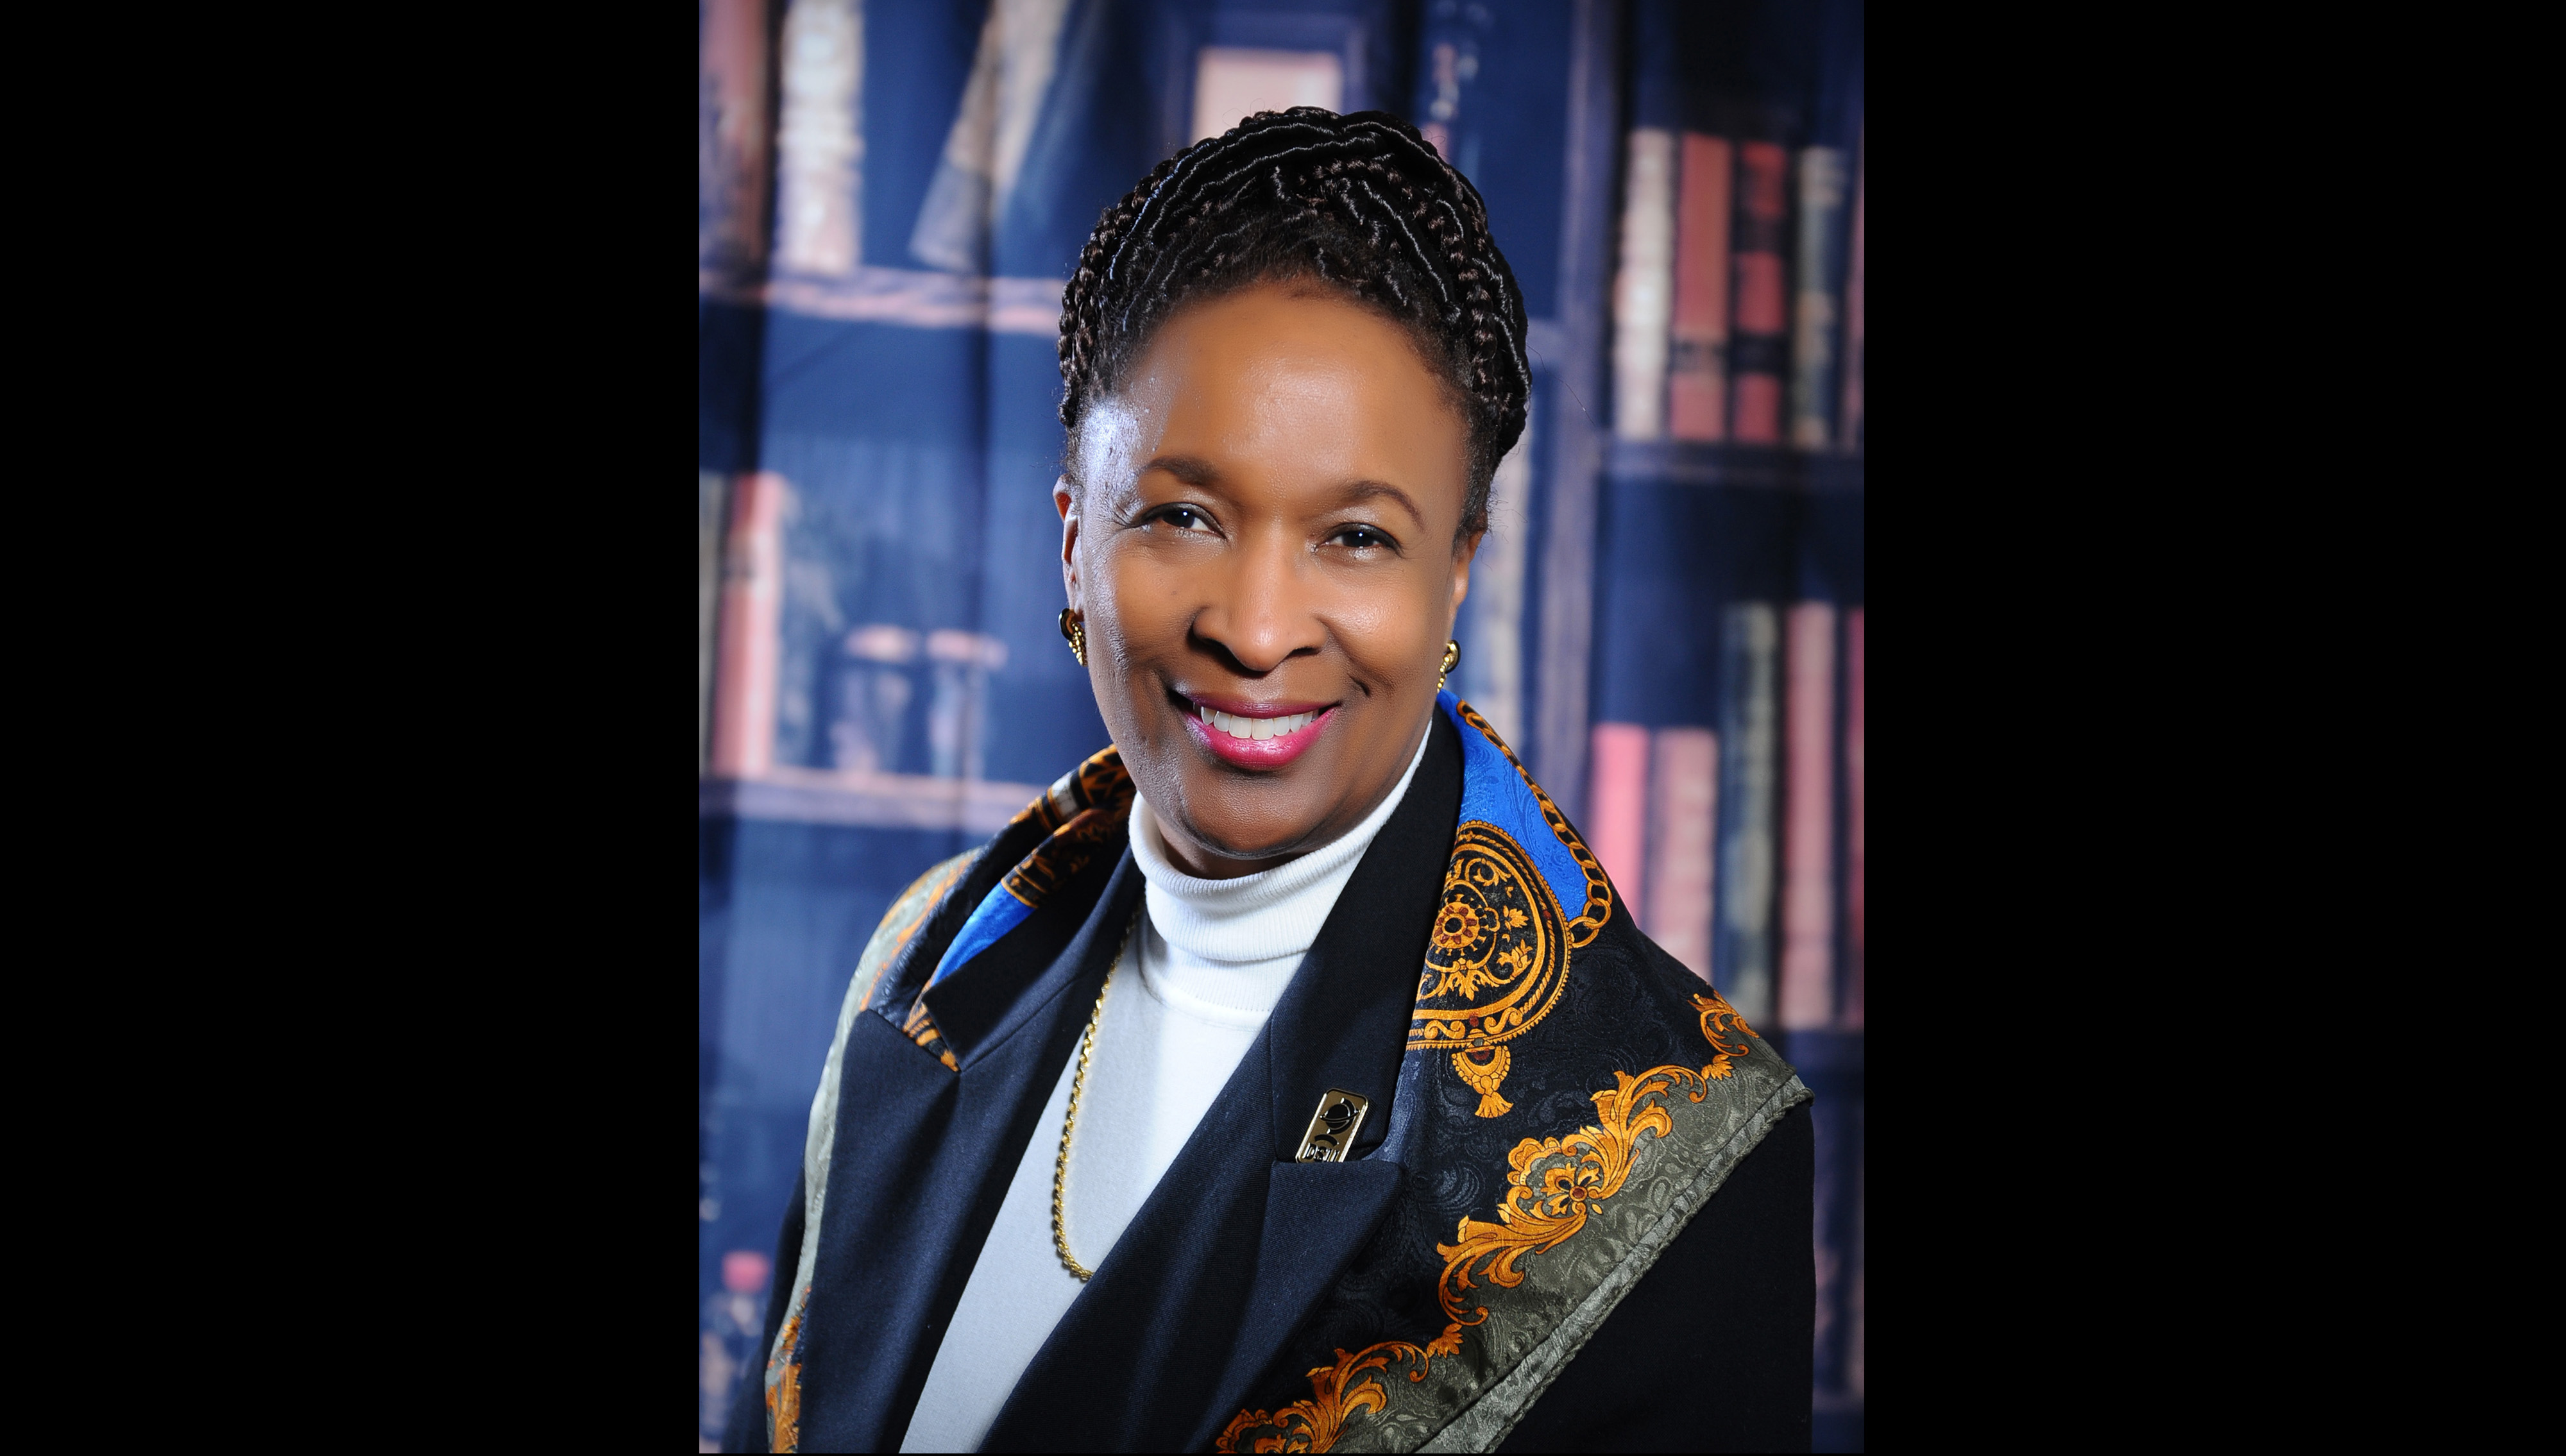 Dr. Marsha Horton is now a member of the Board of Directors of the American Conference of Academic Deans.